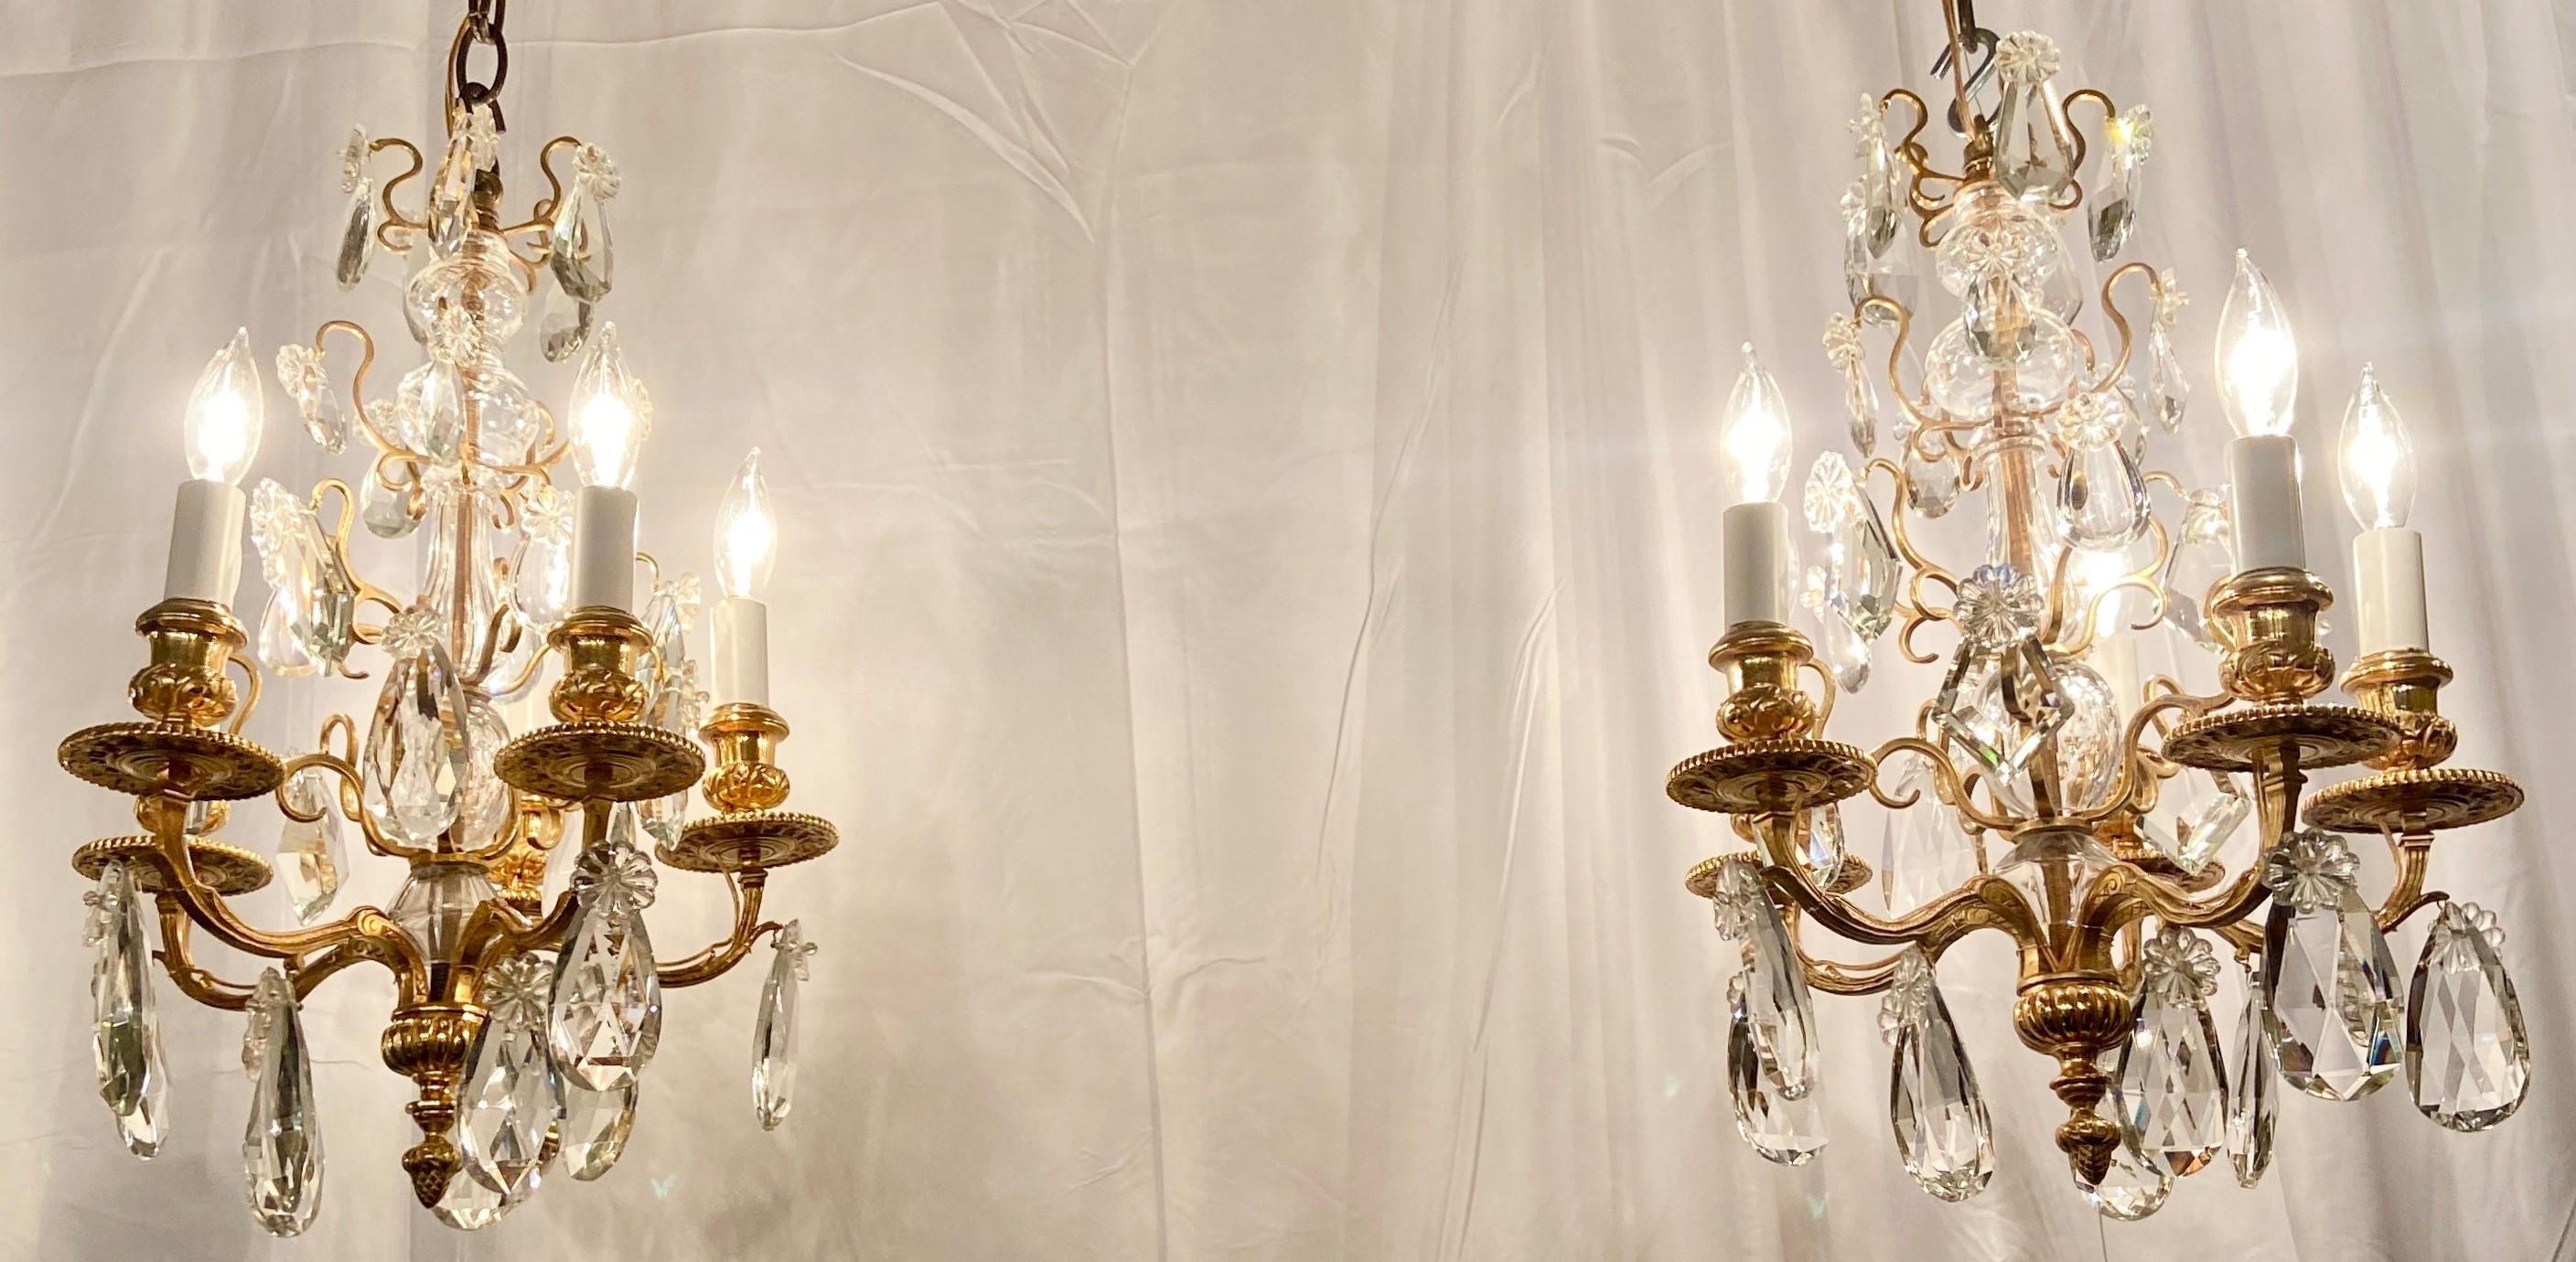 Small pair antique French bronze D'ore and crystal chandeliers, Circa 1890-1900.